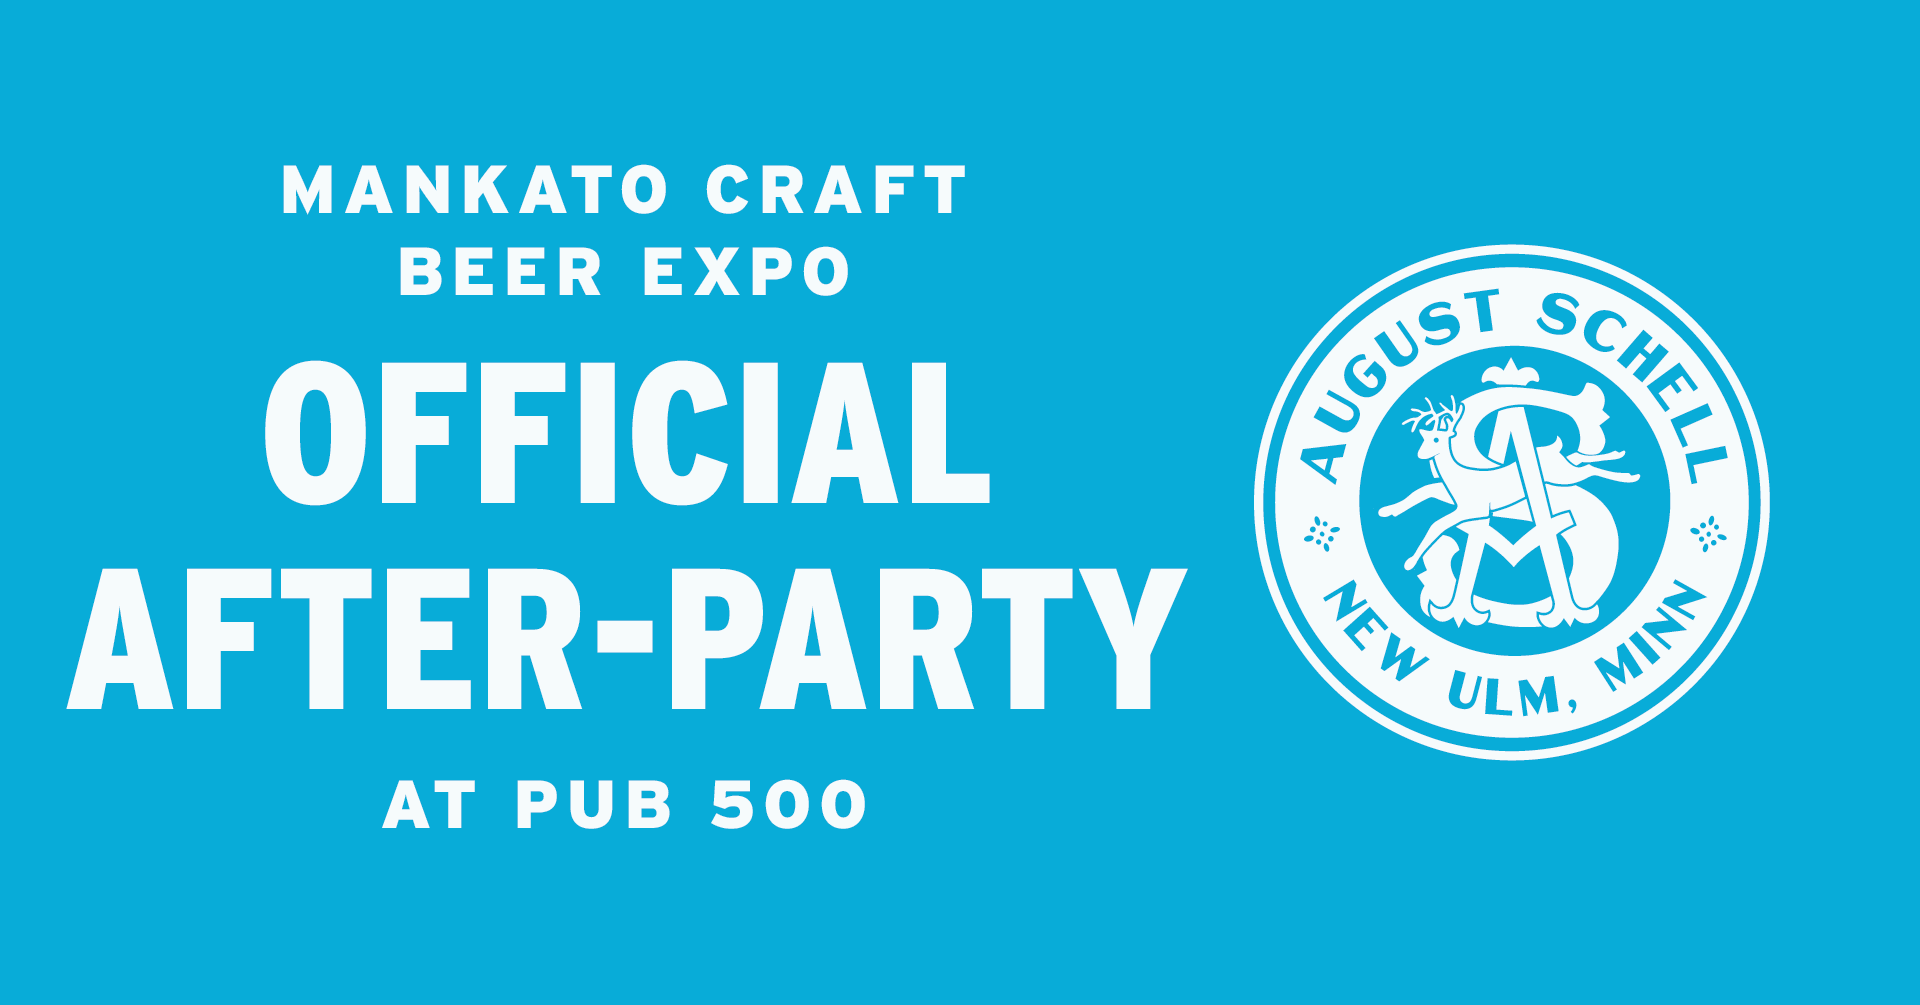 "MANKATO CRAFT BEER EXPO OFFICIAL AFTER-PARTY AT PUB 500" and August Schell Brewery circular logo with a deer